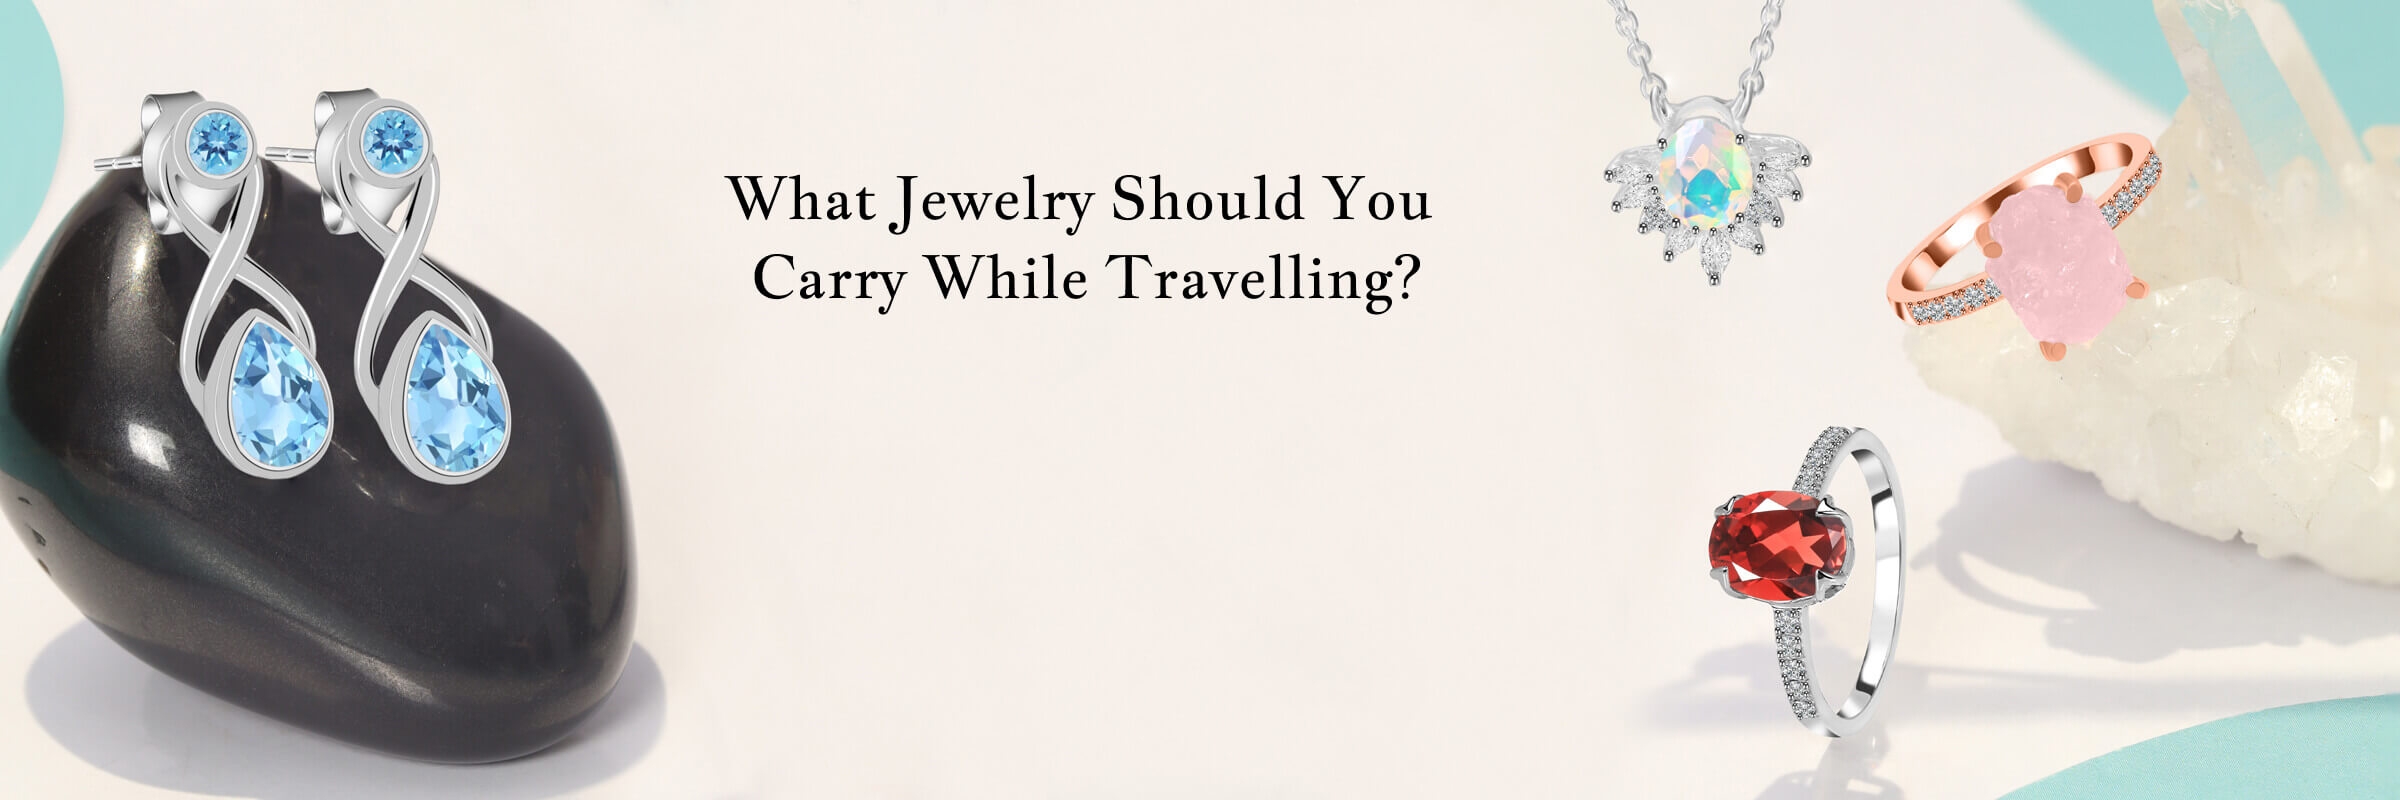 What Jewelry Should You Carry While Travelling?